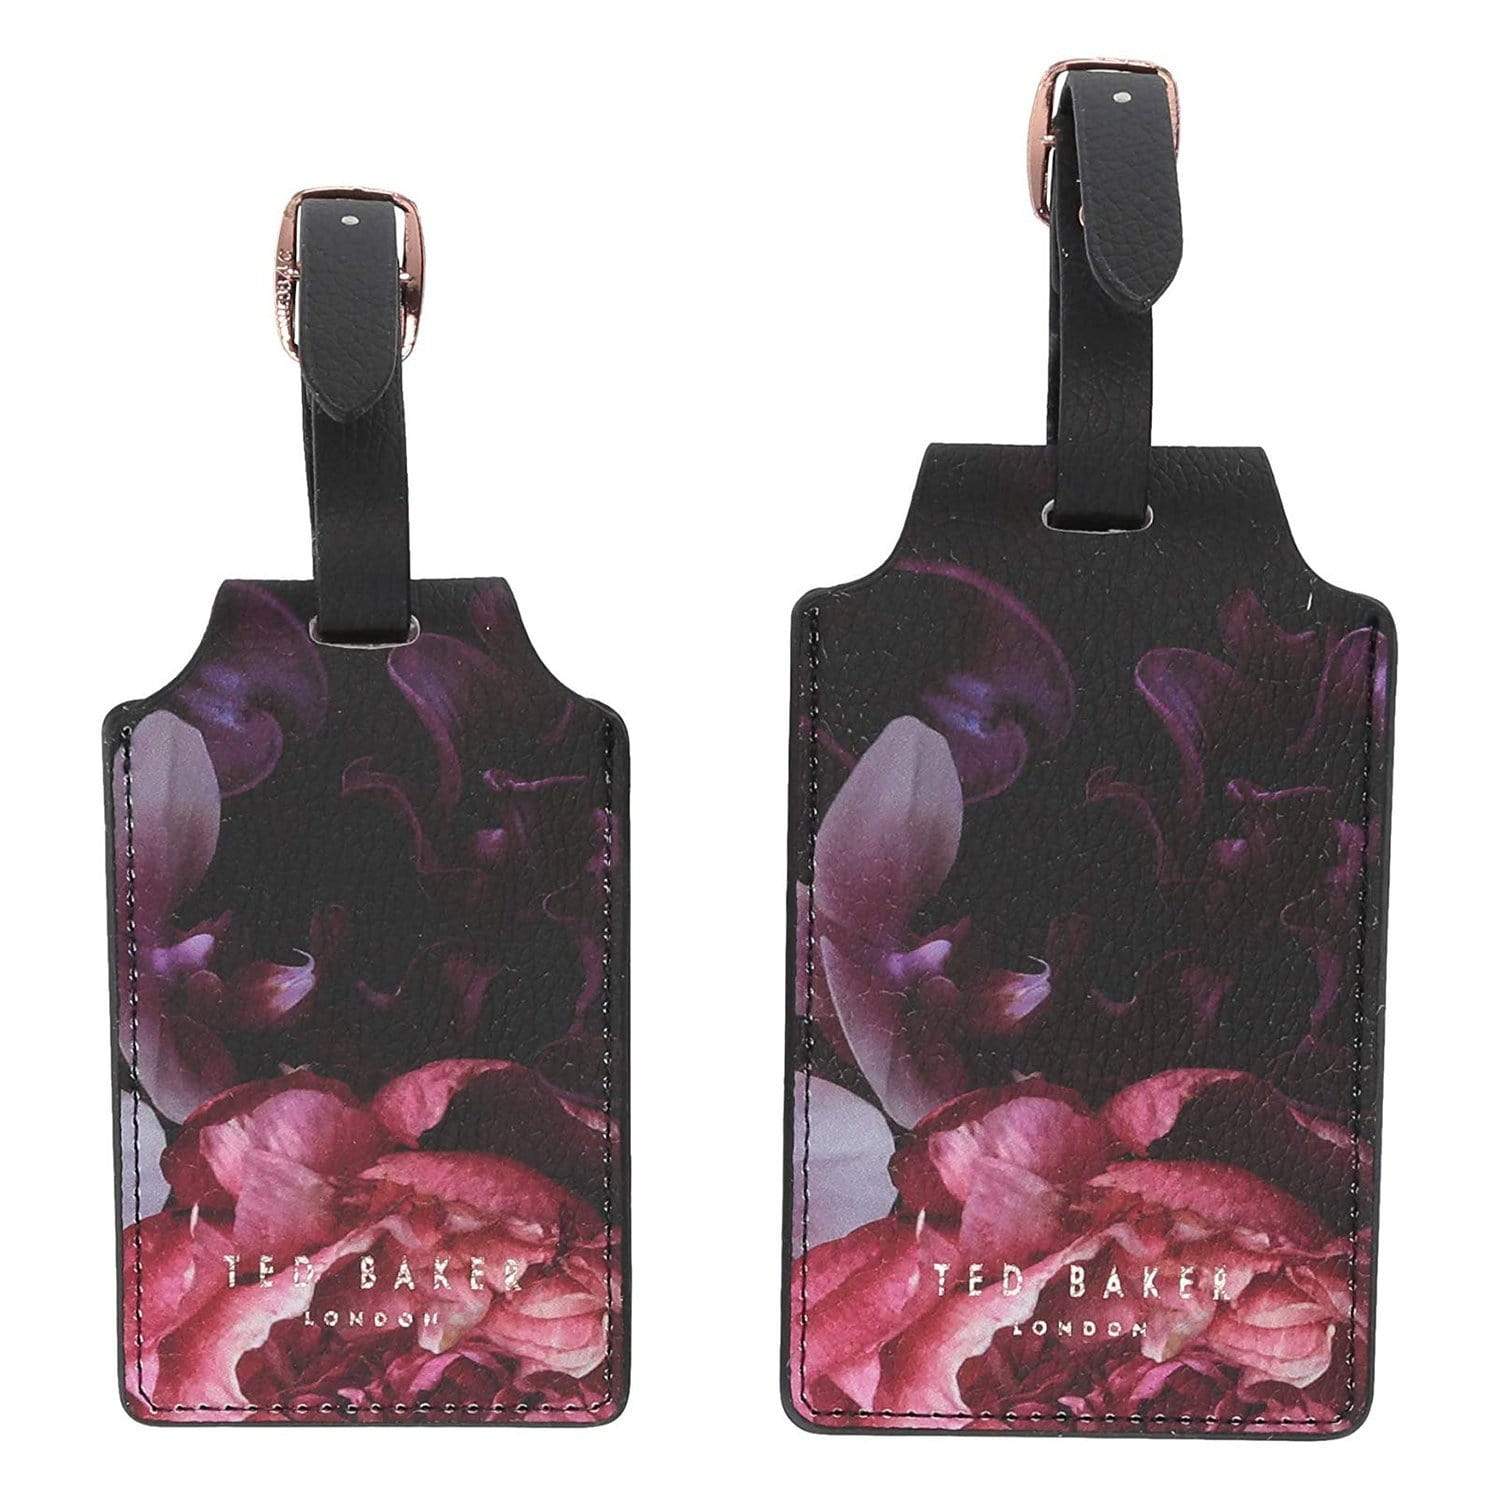 Ted Baker Splendour Luggage Tag - Multicolour, Set of 2 - TED399